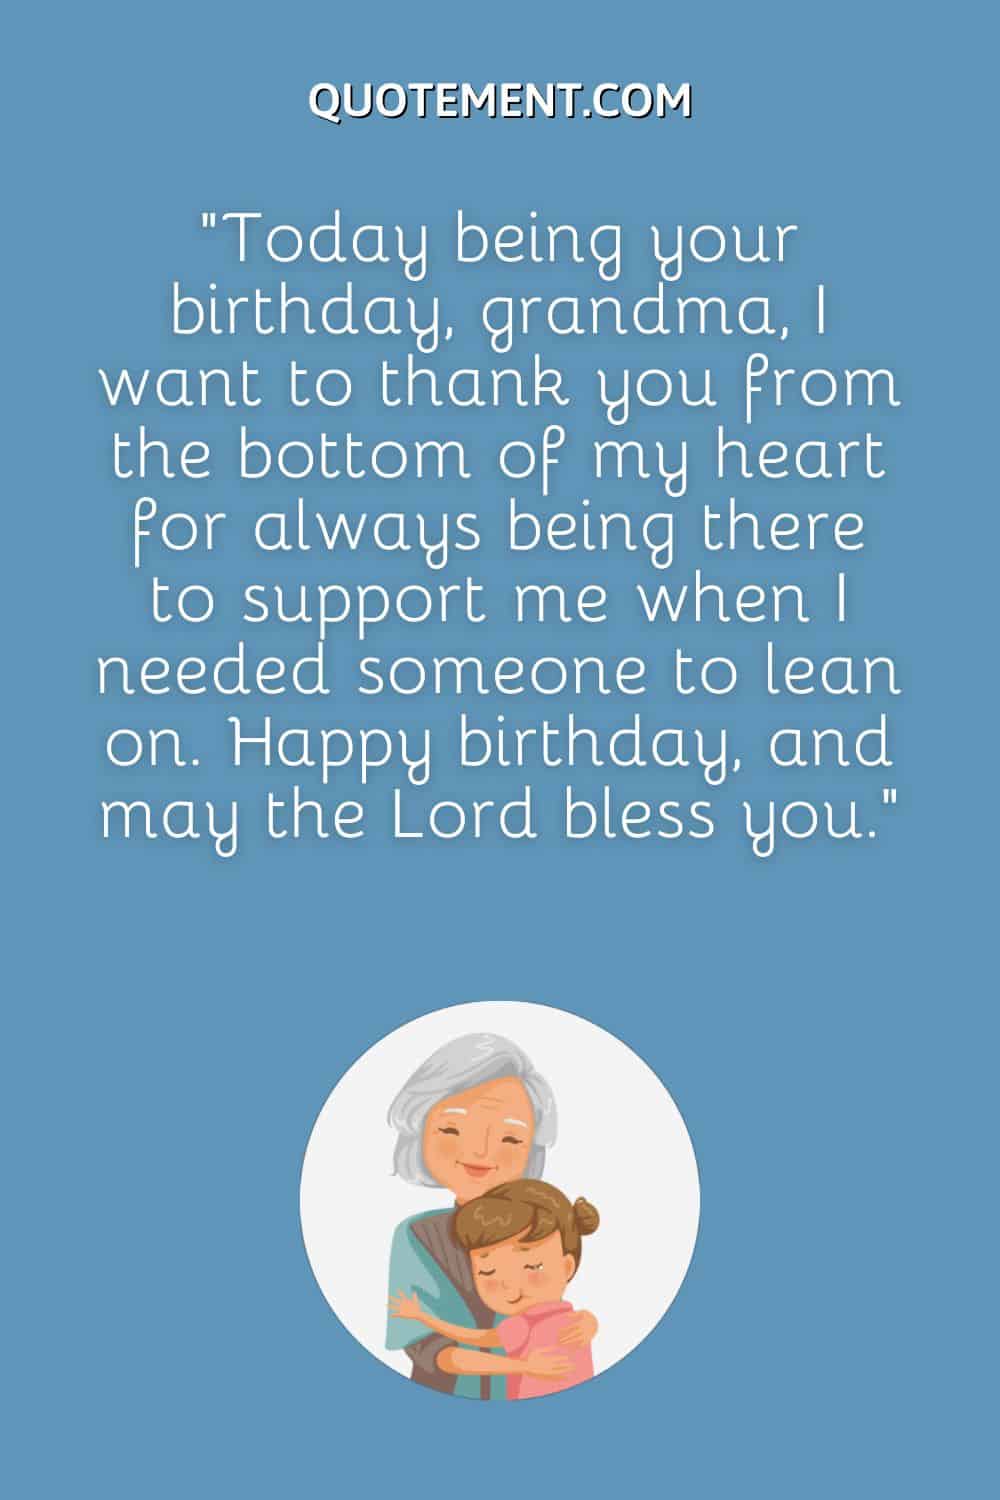 Today being your birthday, grandma, I want to thank you from the bottom of my heart